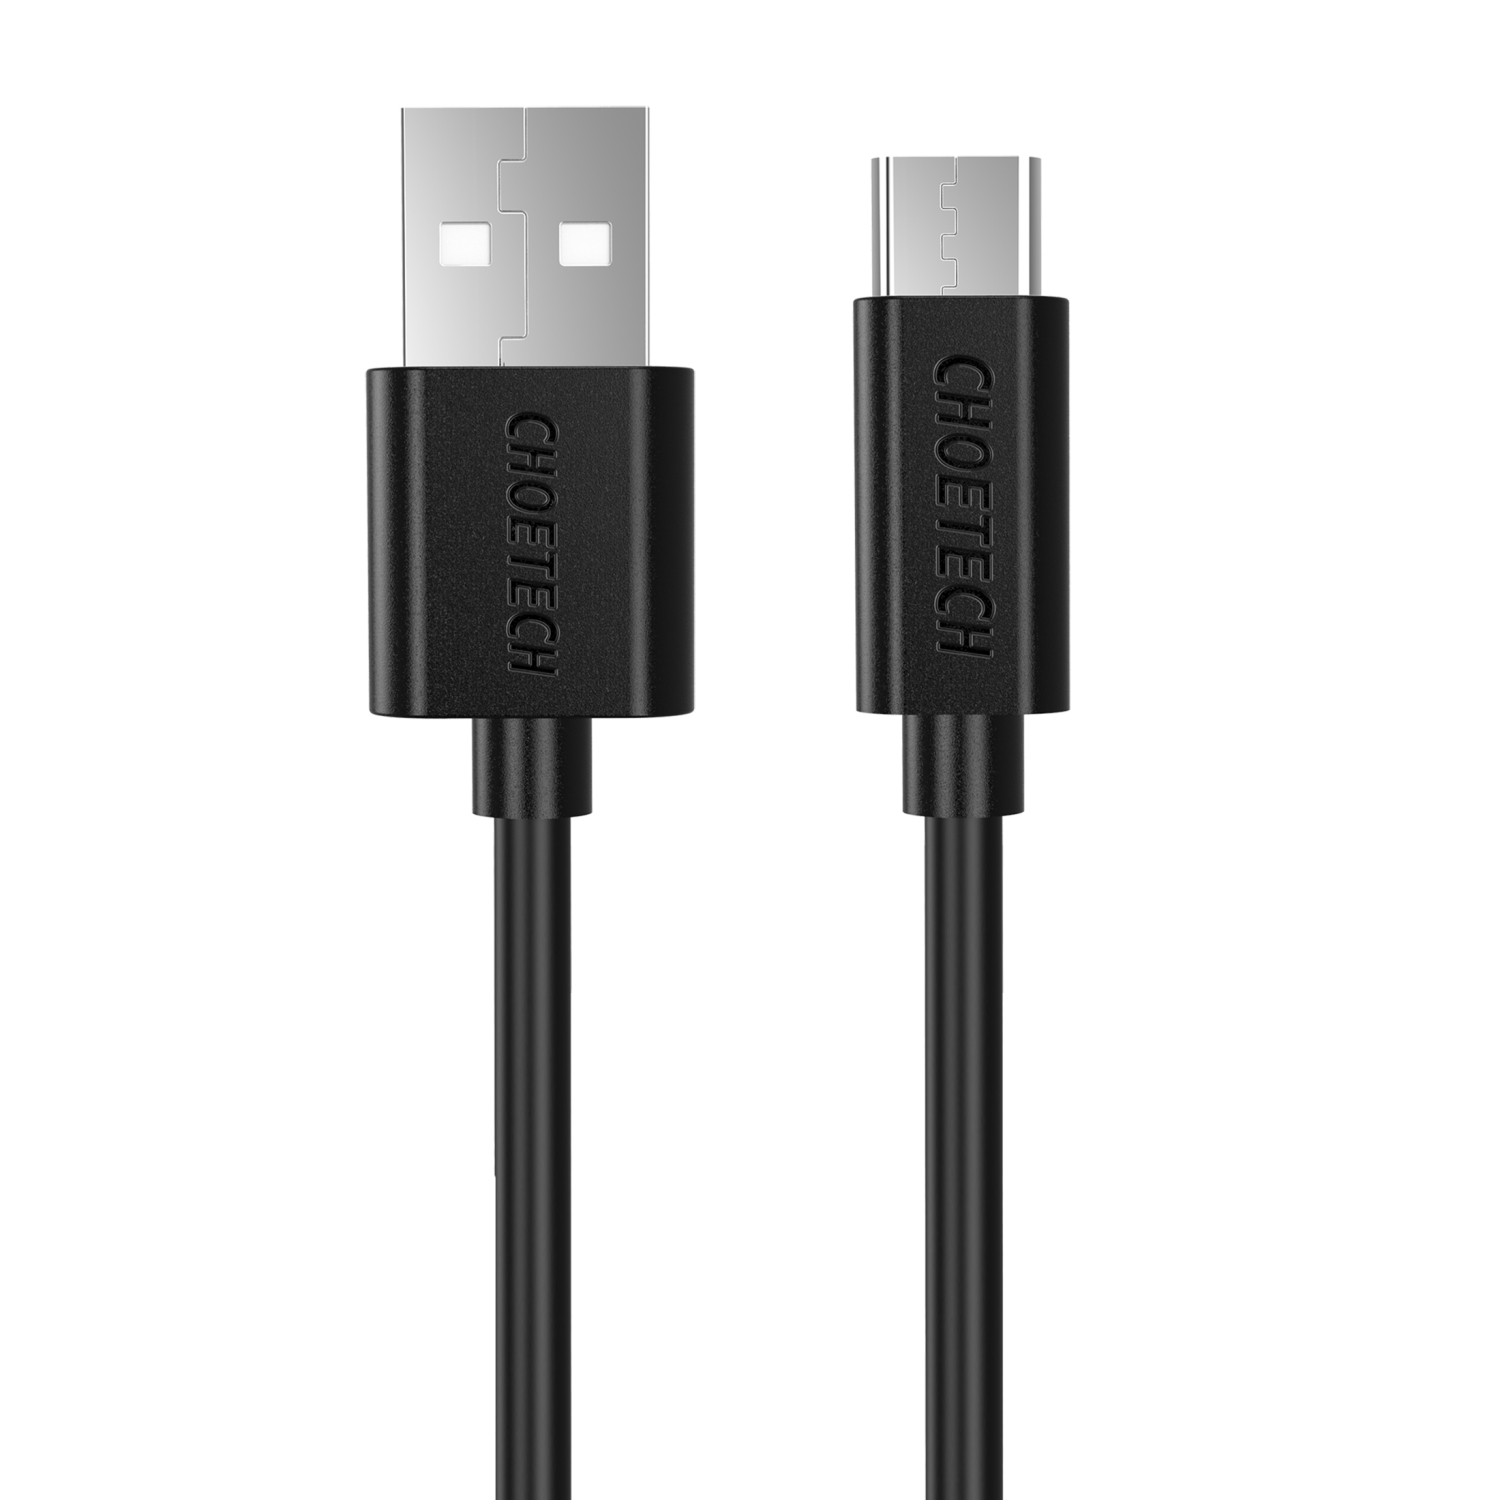 Choetech USB A - Type C Cable - Black (2m) - (AC0003) - Brand New